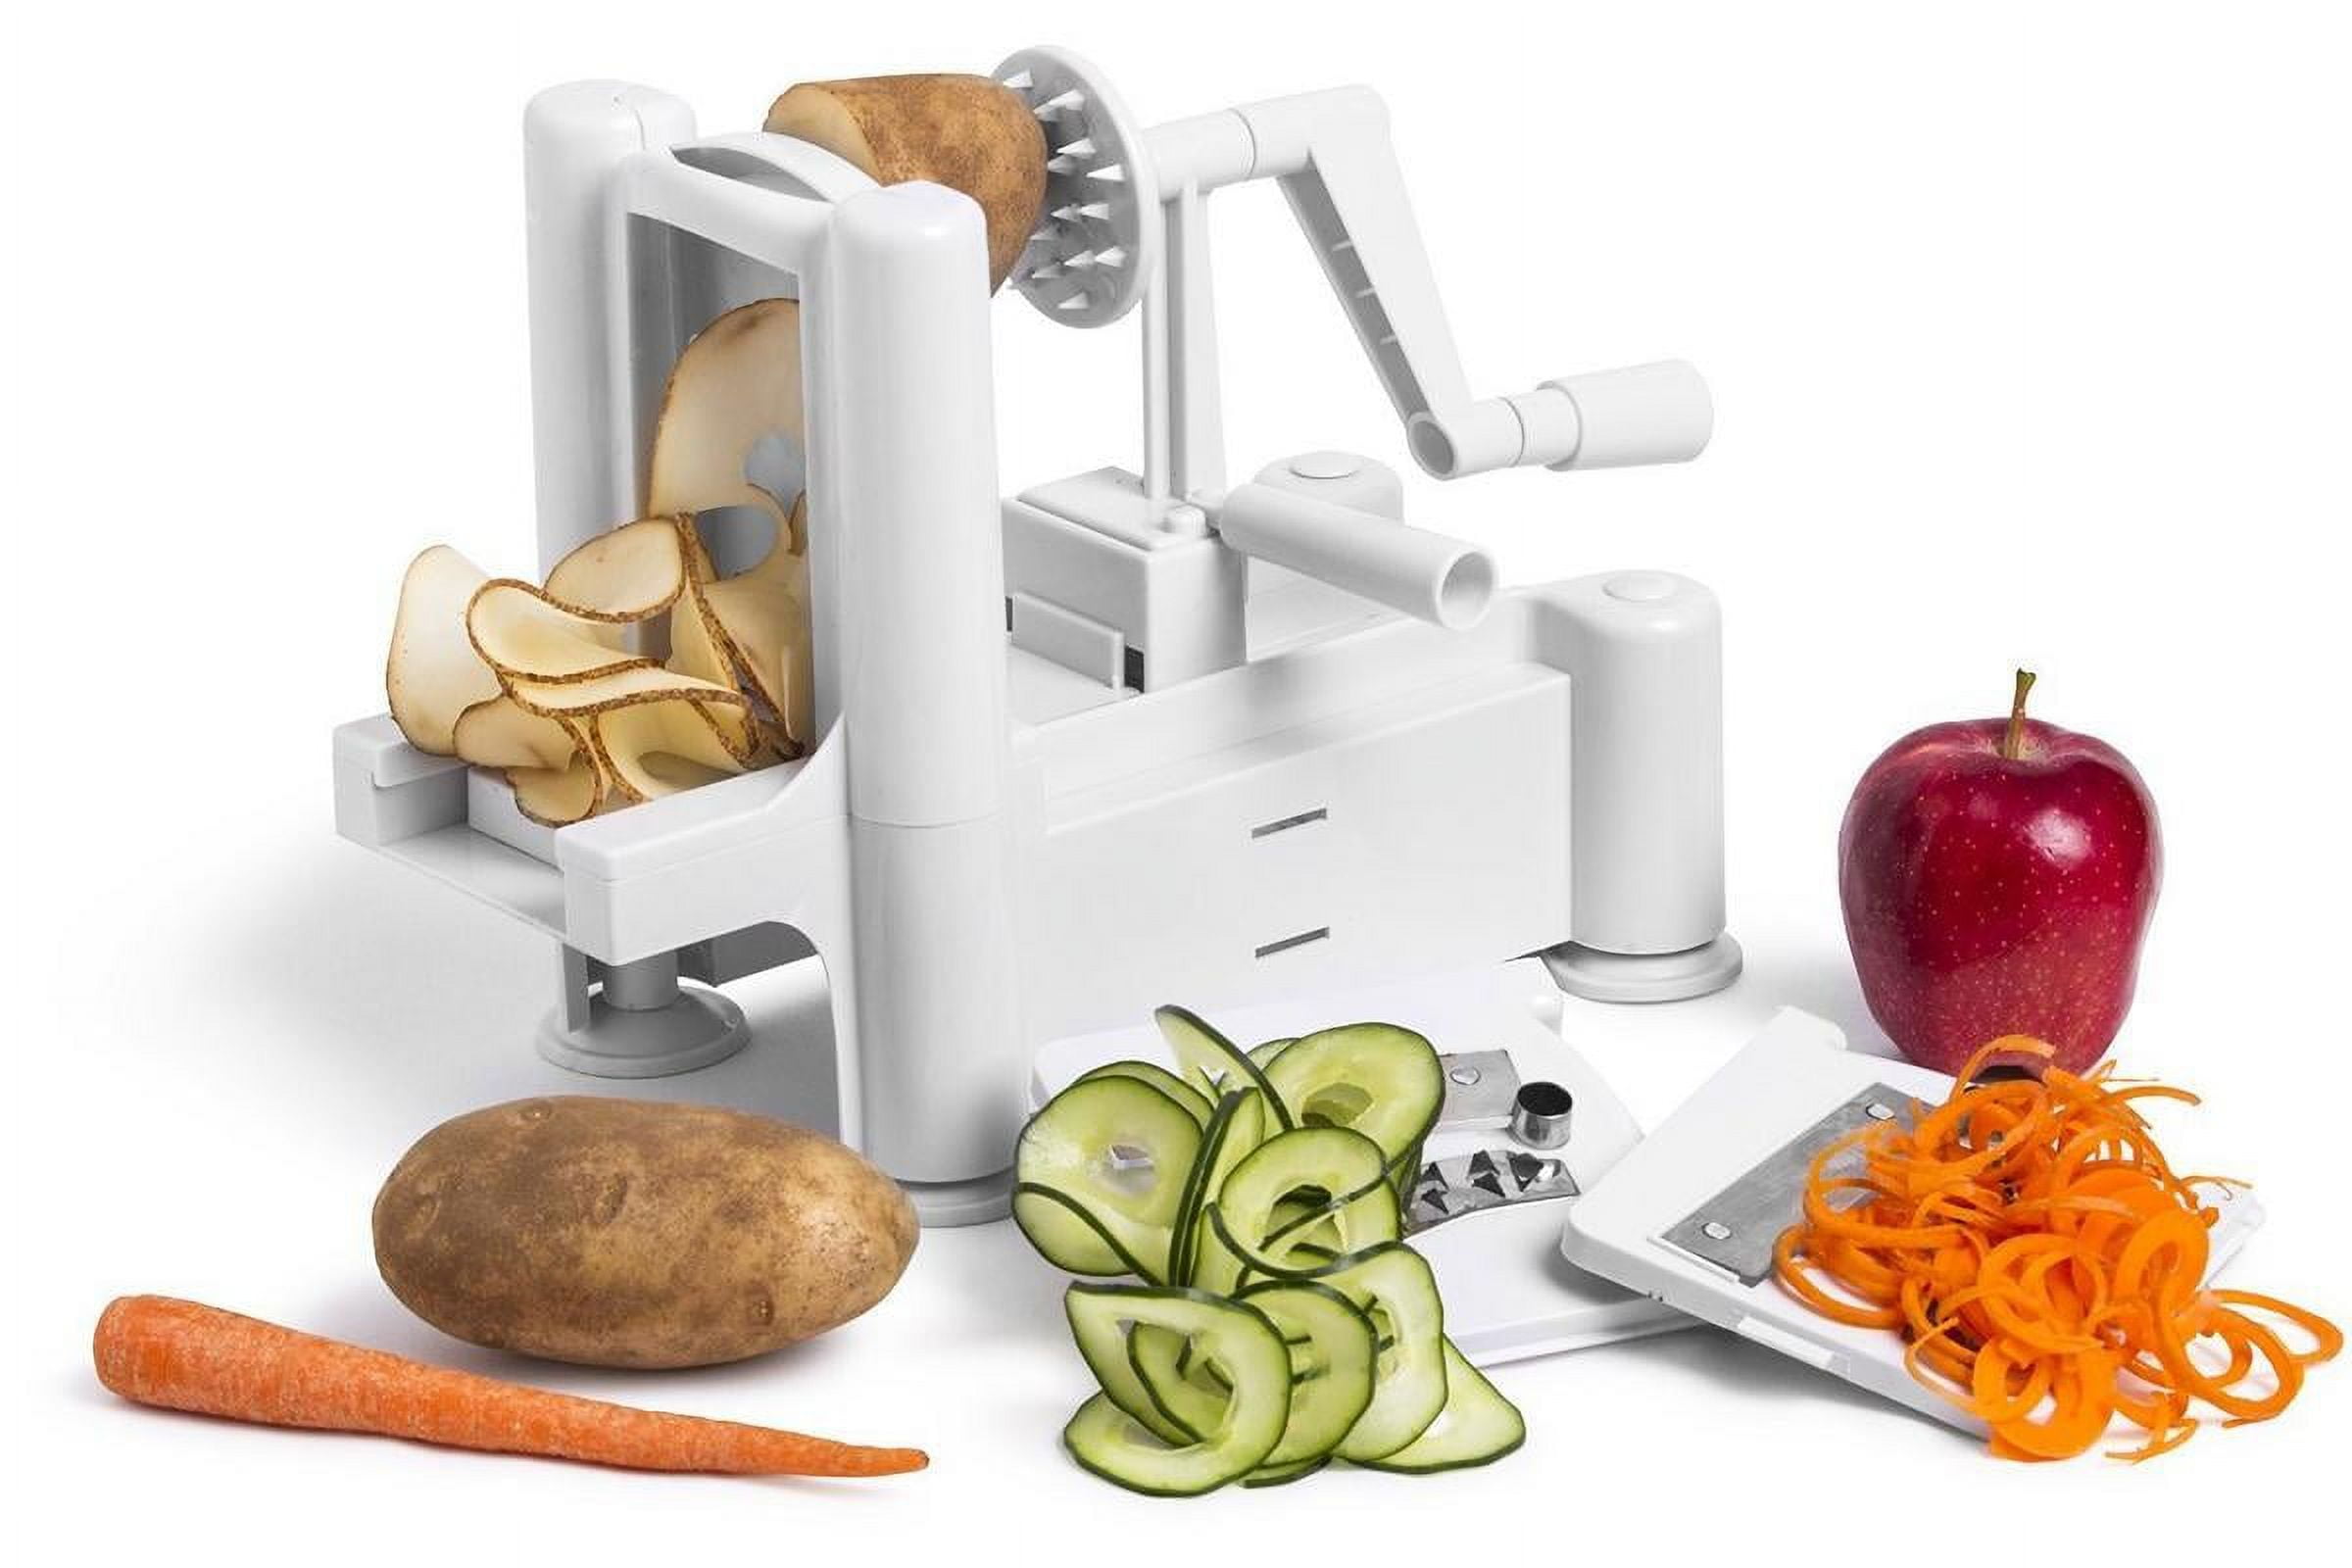 ICO 4-Blade Steel Vegetable Spiralizer Slicer and Curly Fry Cutter